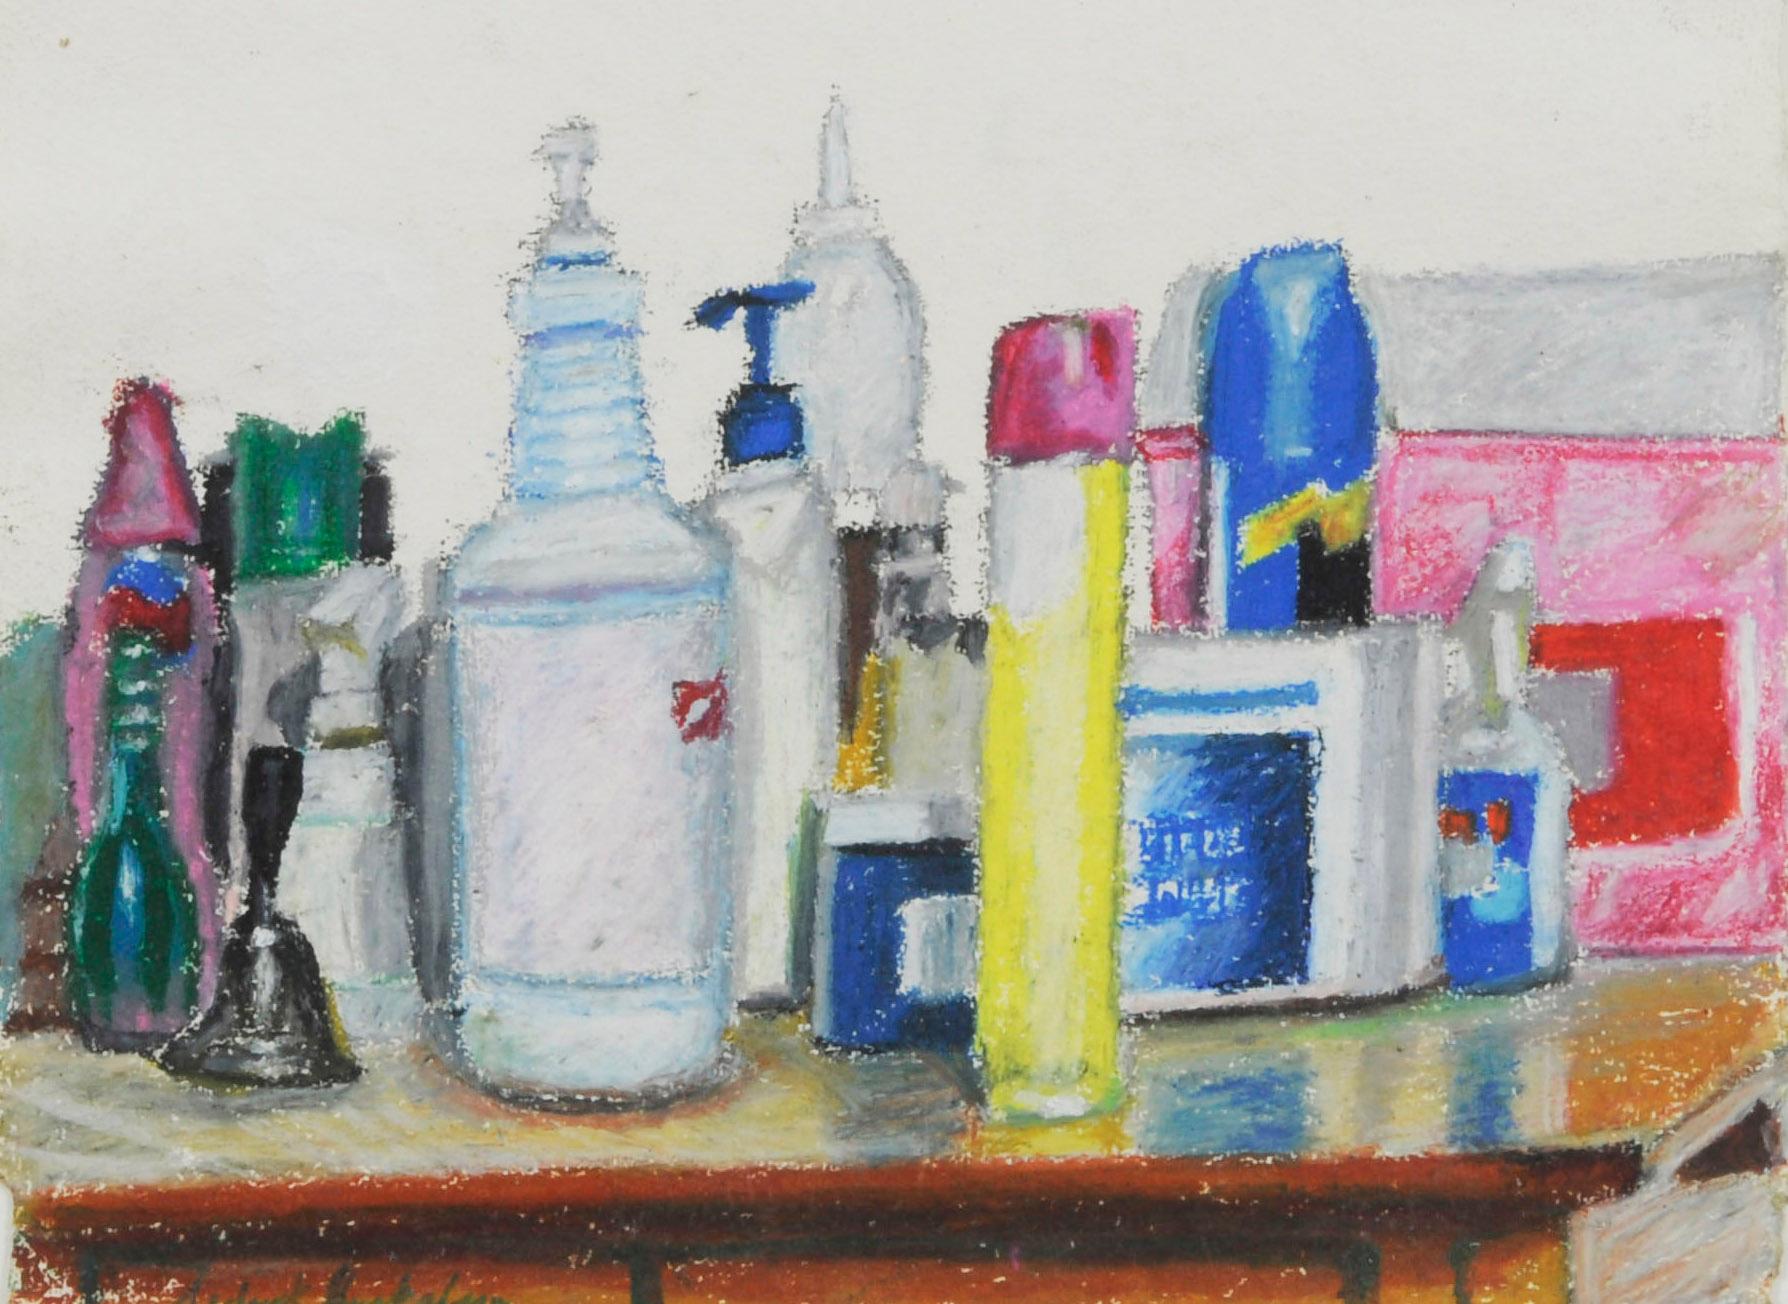 Big Momma's Still Life #2
Oil pastel on rag paper, 2007
Signed by the artist lower left: 